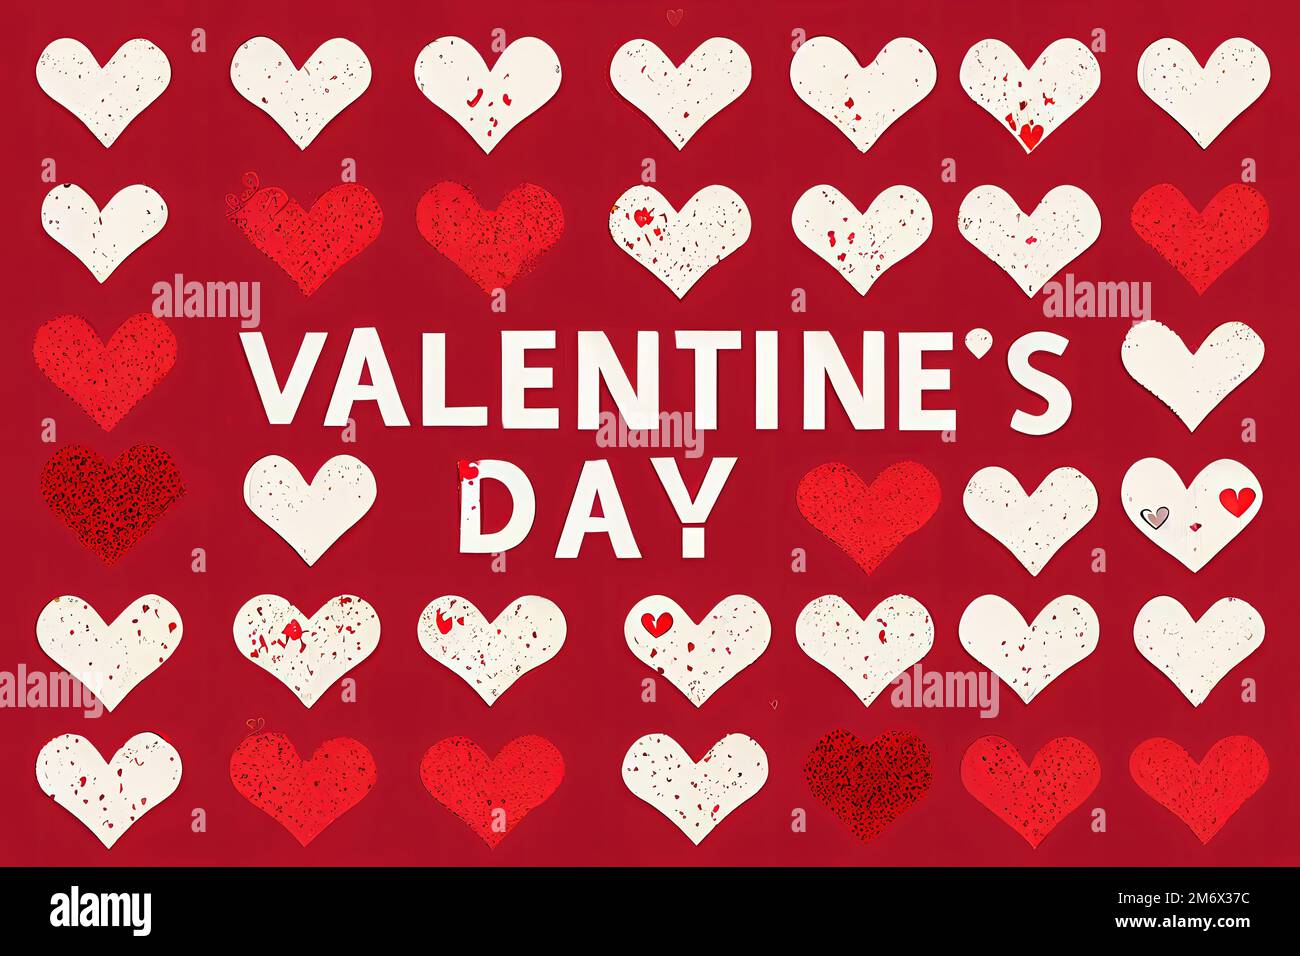 Valentine's Day card with lots of red hearts Stock Photo